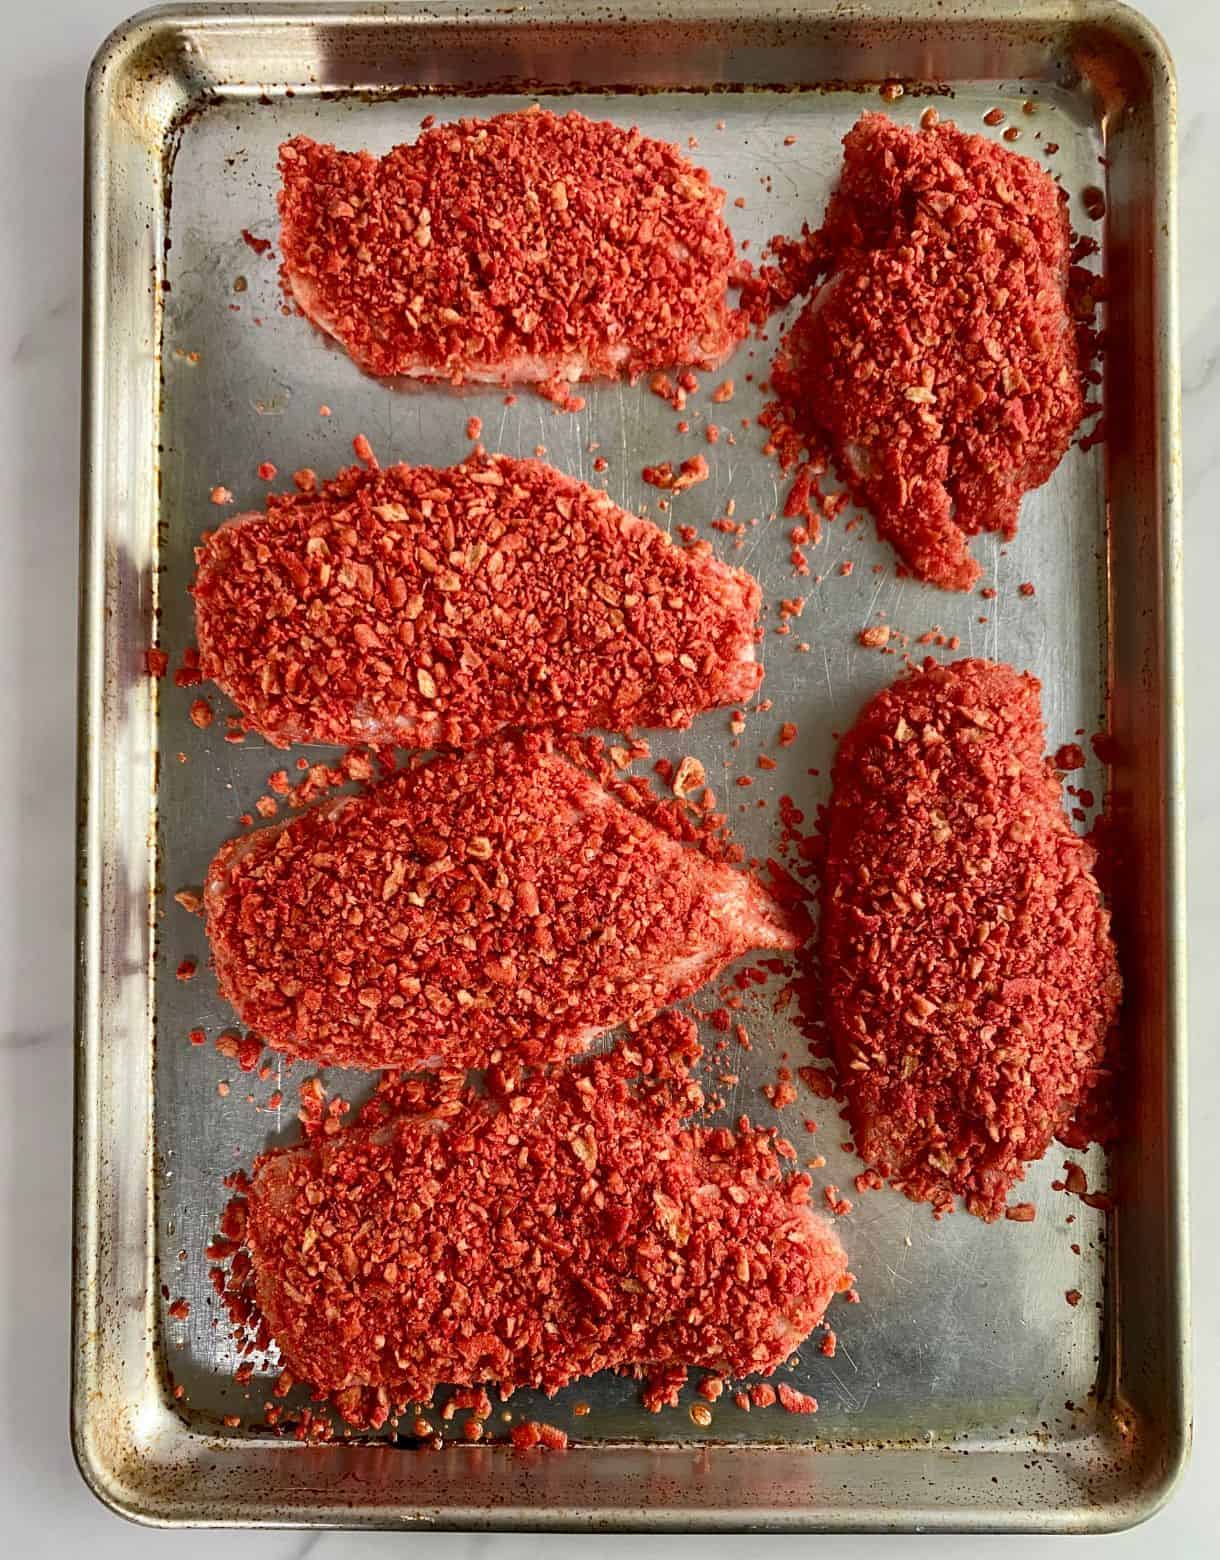 A sheet pan of raw chicken cutlets coated in crushed Takis and ready to bake.